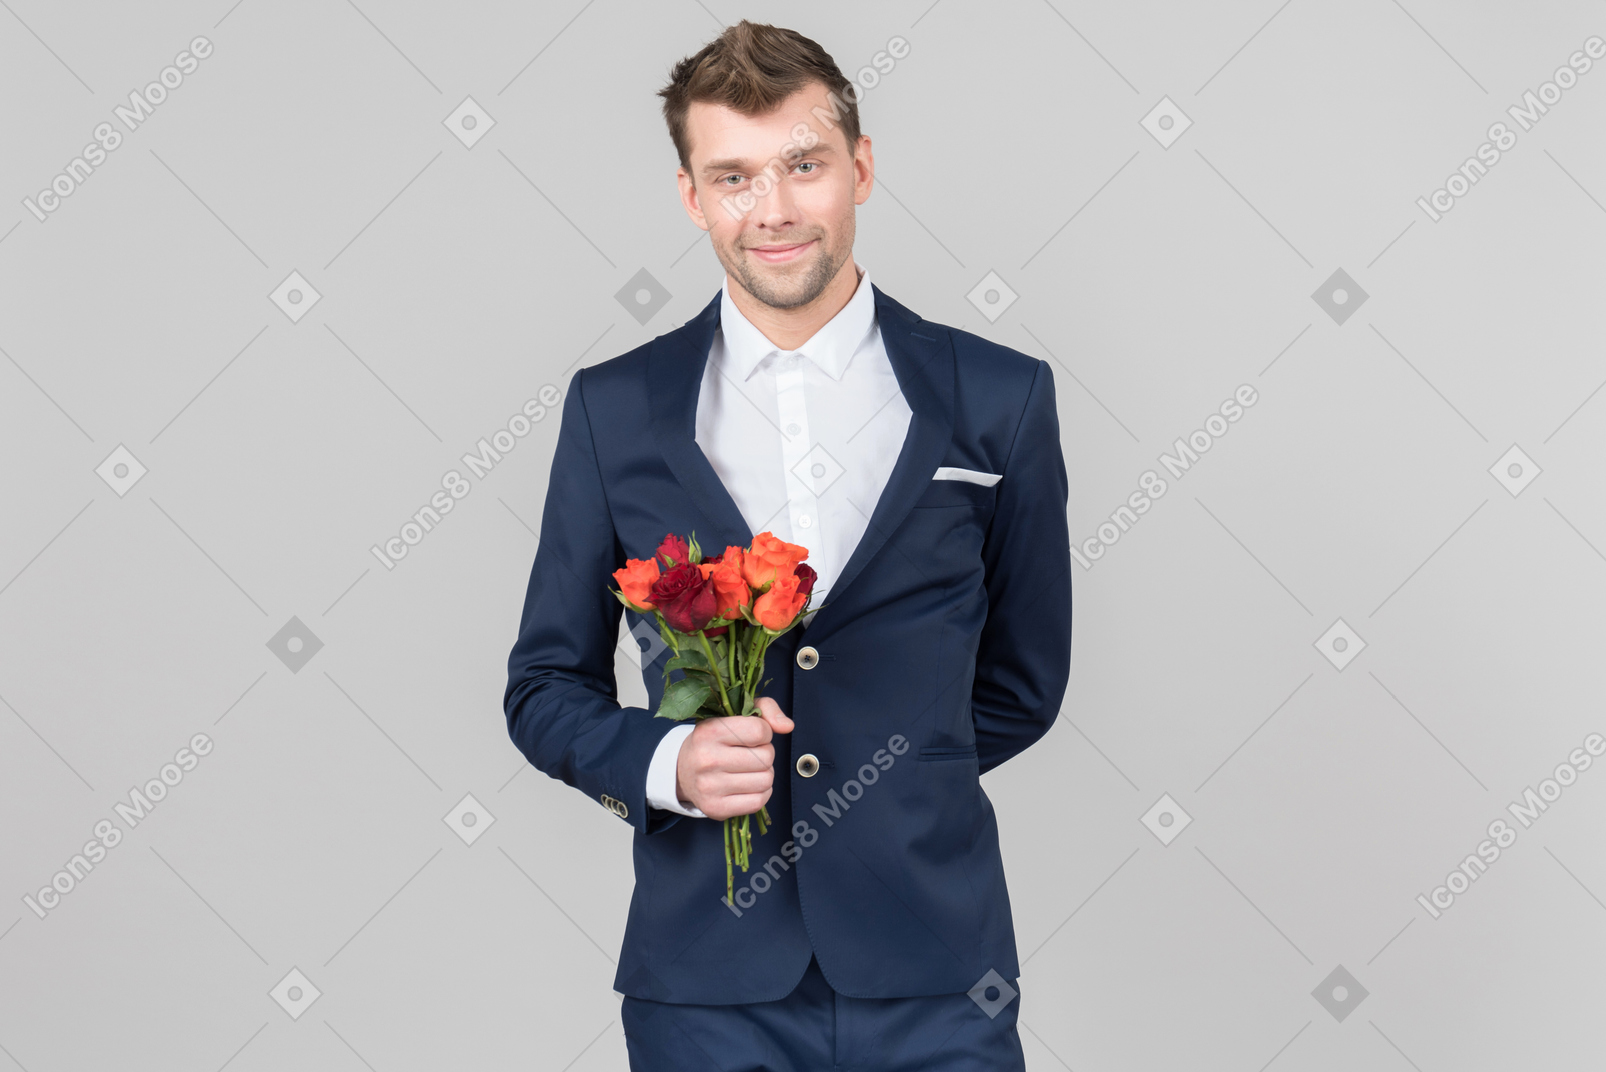 These roses are for you